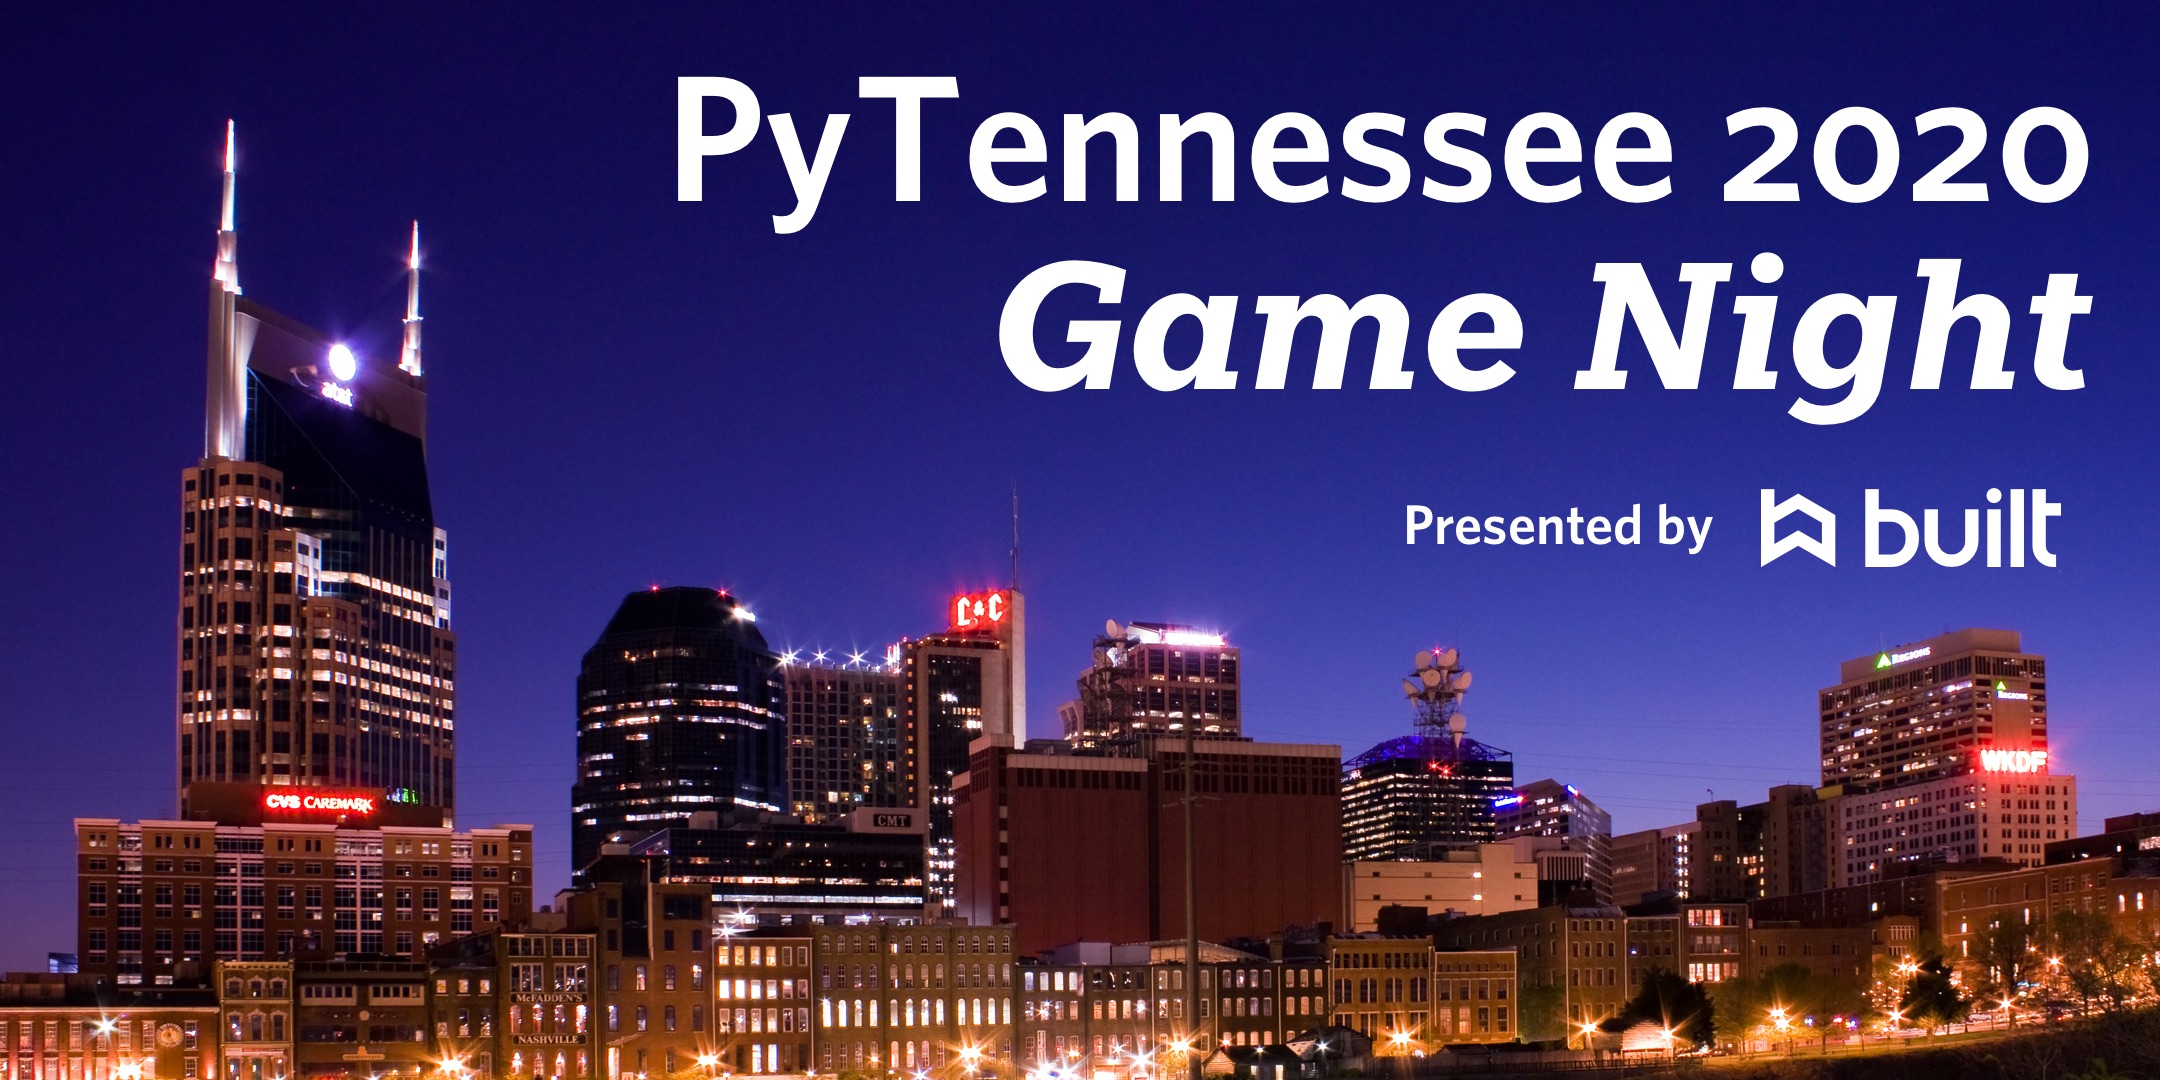 A colorized shot of the Nashville skyline with the text PyTennessee Game Night Presented by Built